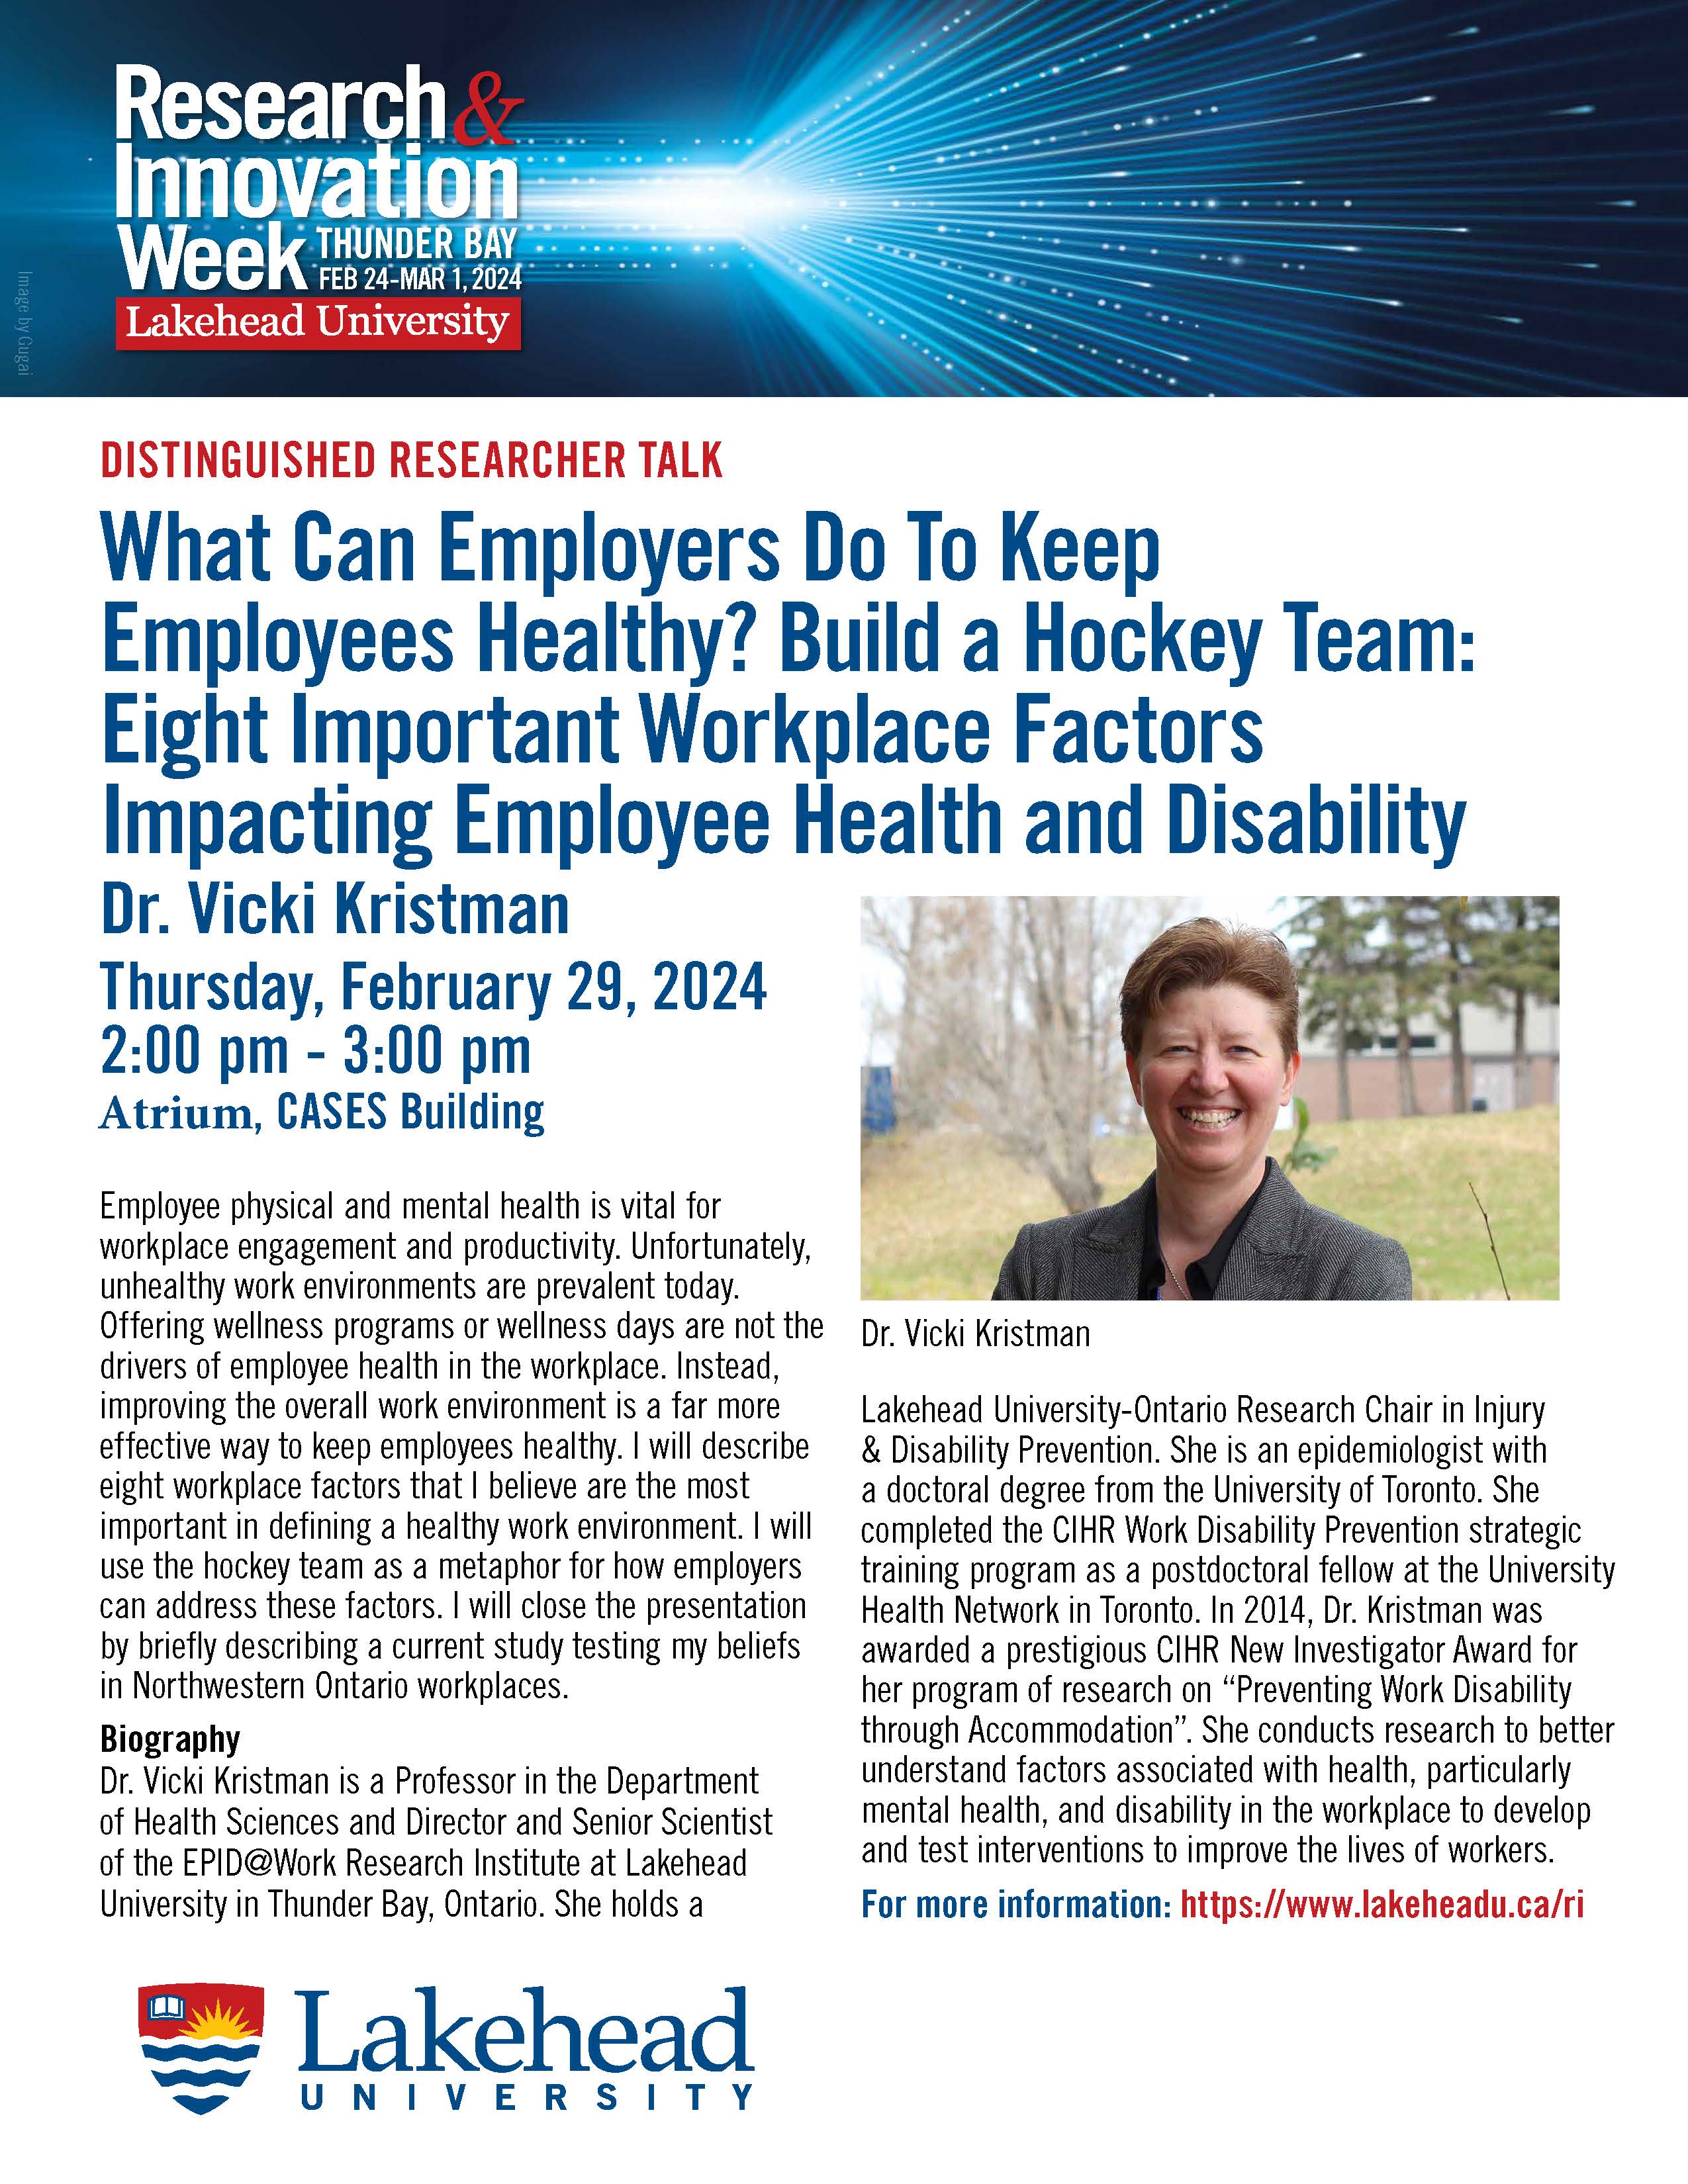 Event Poster: Dr. Vicki Kristman -Distinguished Researcher Talk "What Can Employers Do To Keep Employees Healthy? Build a Hockey Team: Eight Important Workplace Factors Impacting Employee Health and Disability"